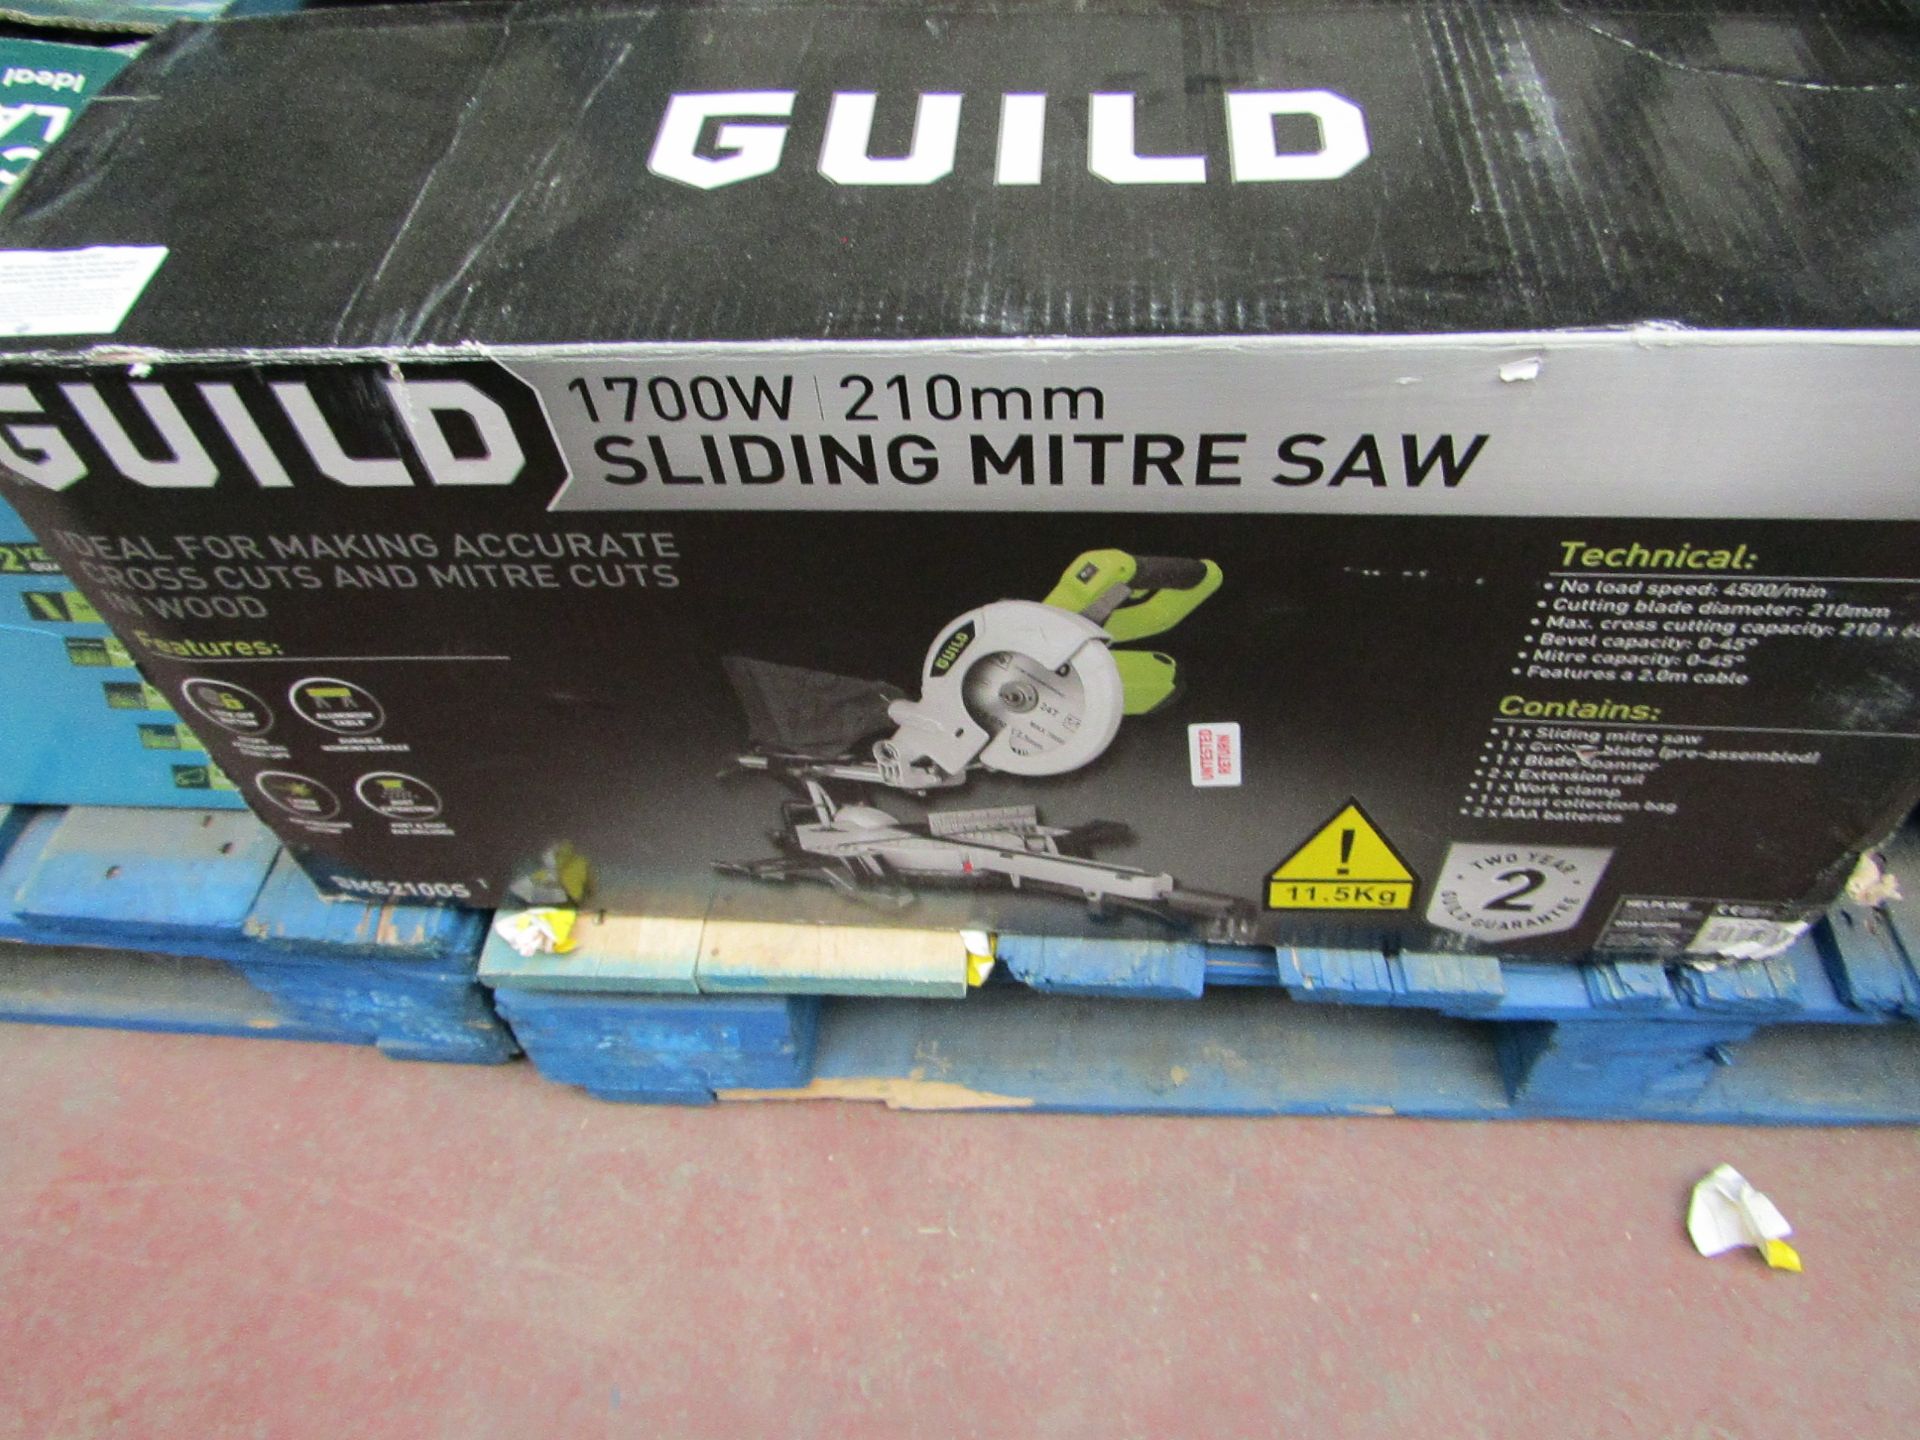 Guild 1700w Sliding Mitre saw, tested working and boxed